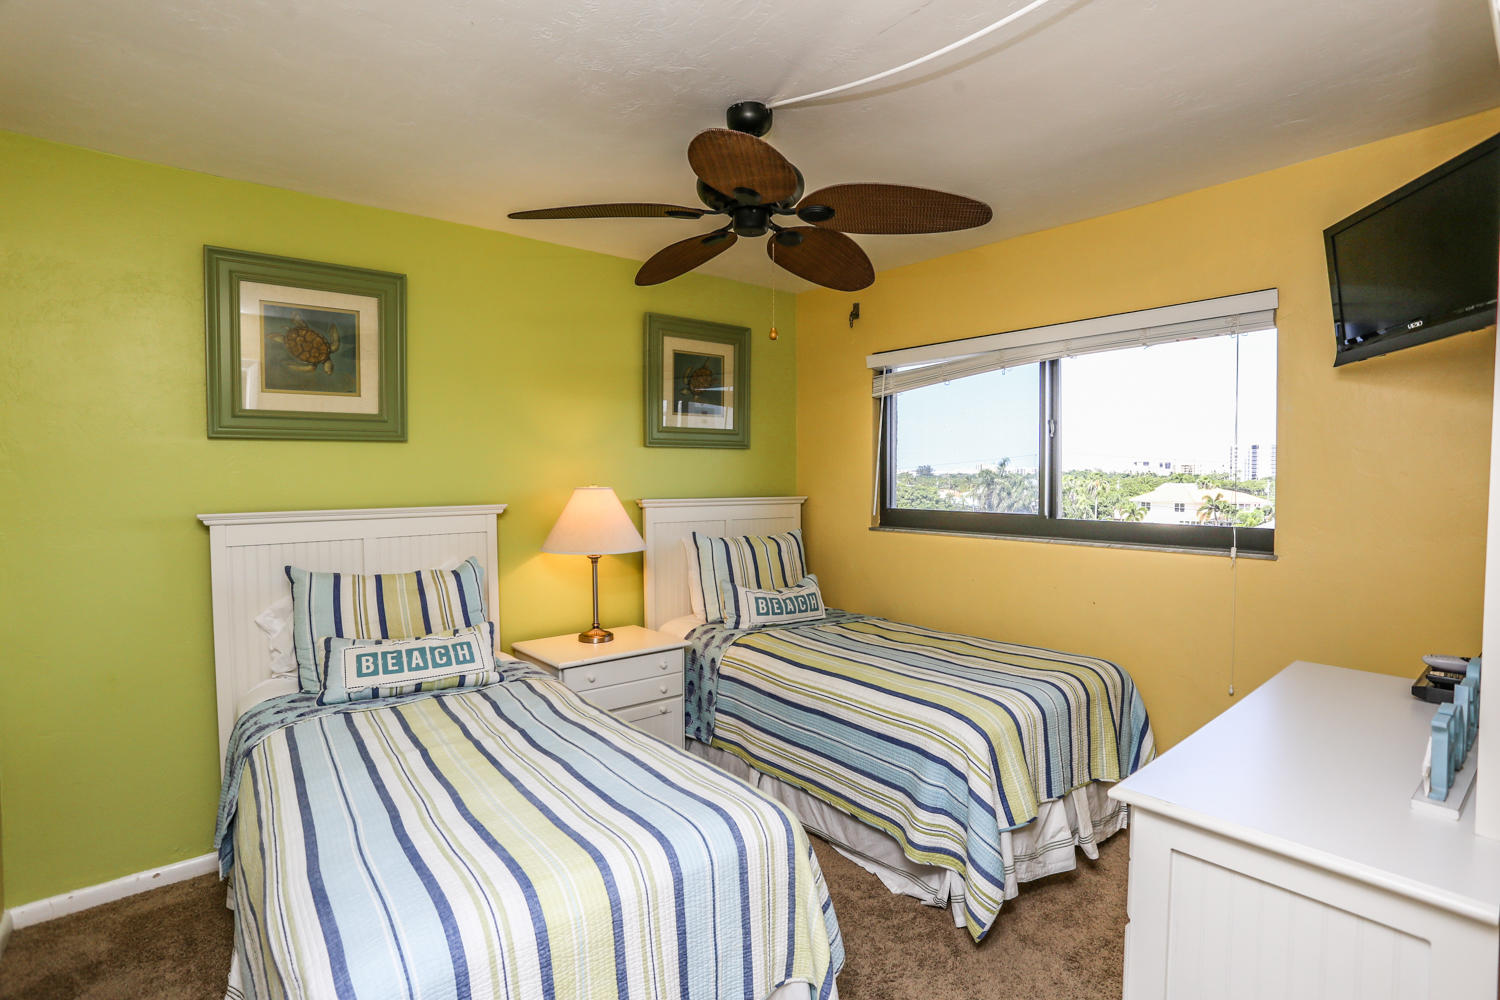 Carlos Pointe 431: Fort Myers Beach 2 Bedroom 2 Full Bathroom Place To